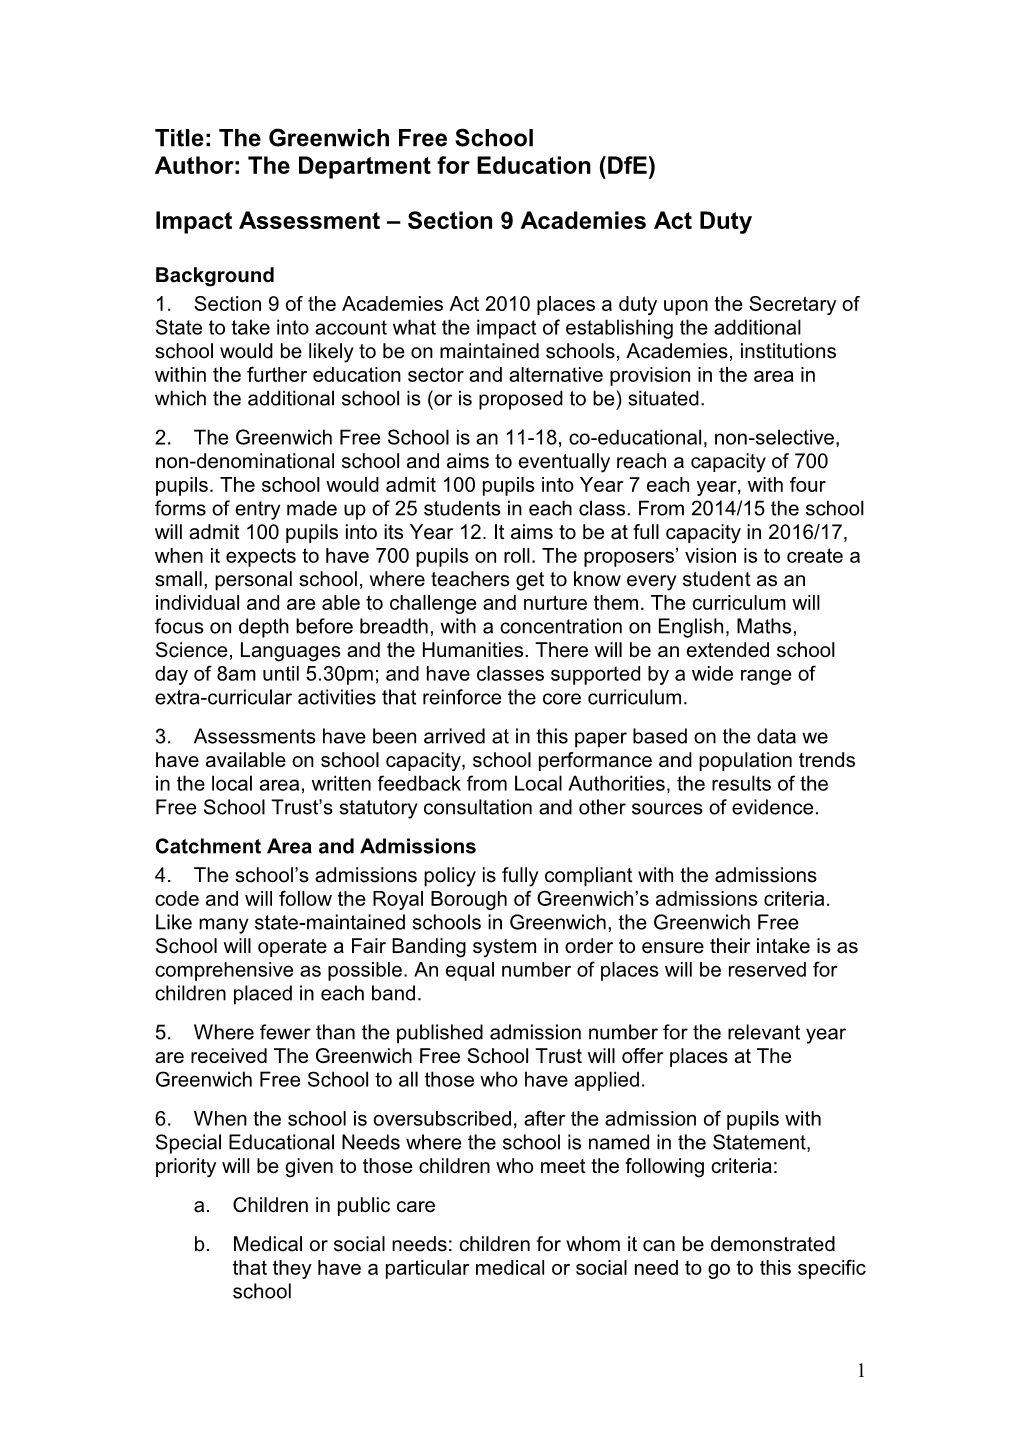 Greenwich Free School Author: the Department for Education (Dfe)